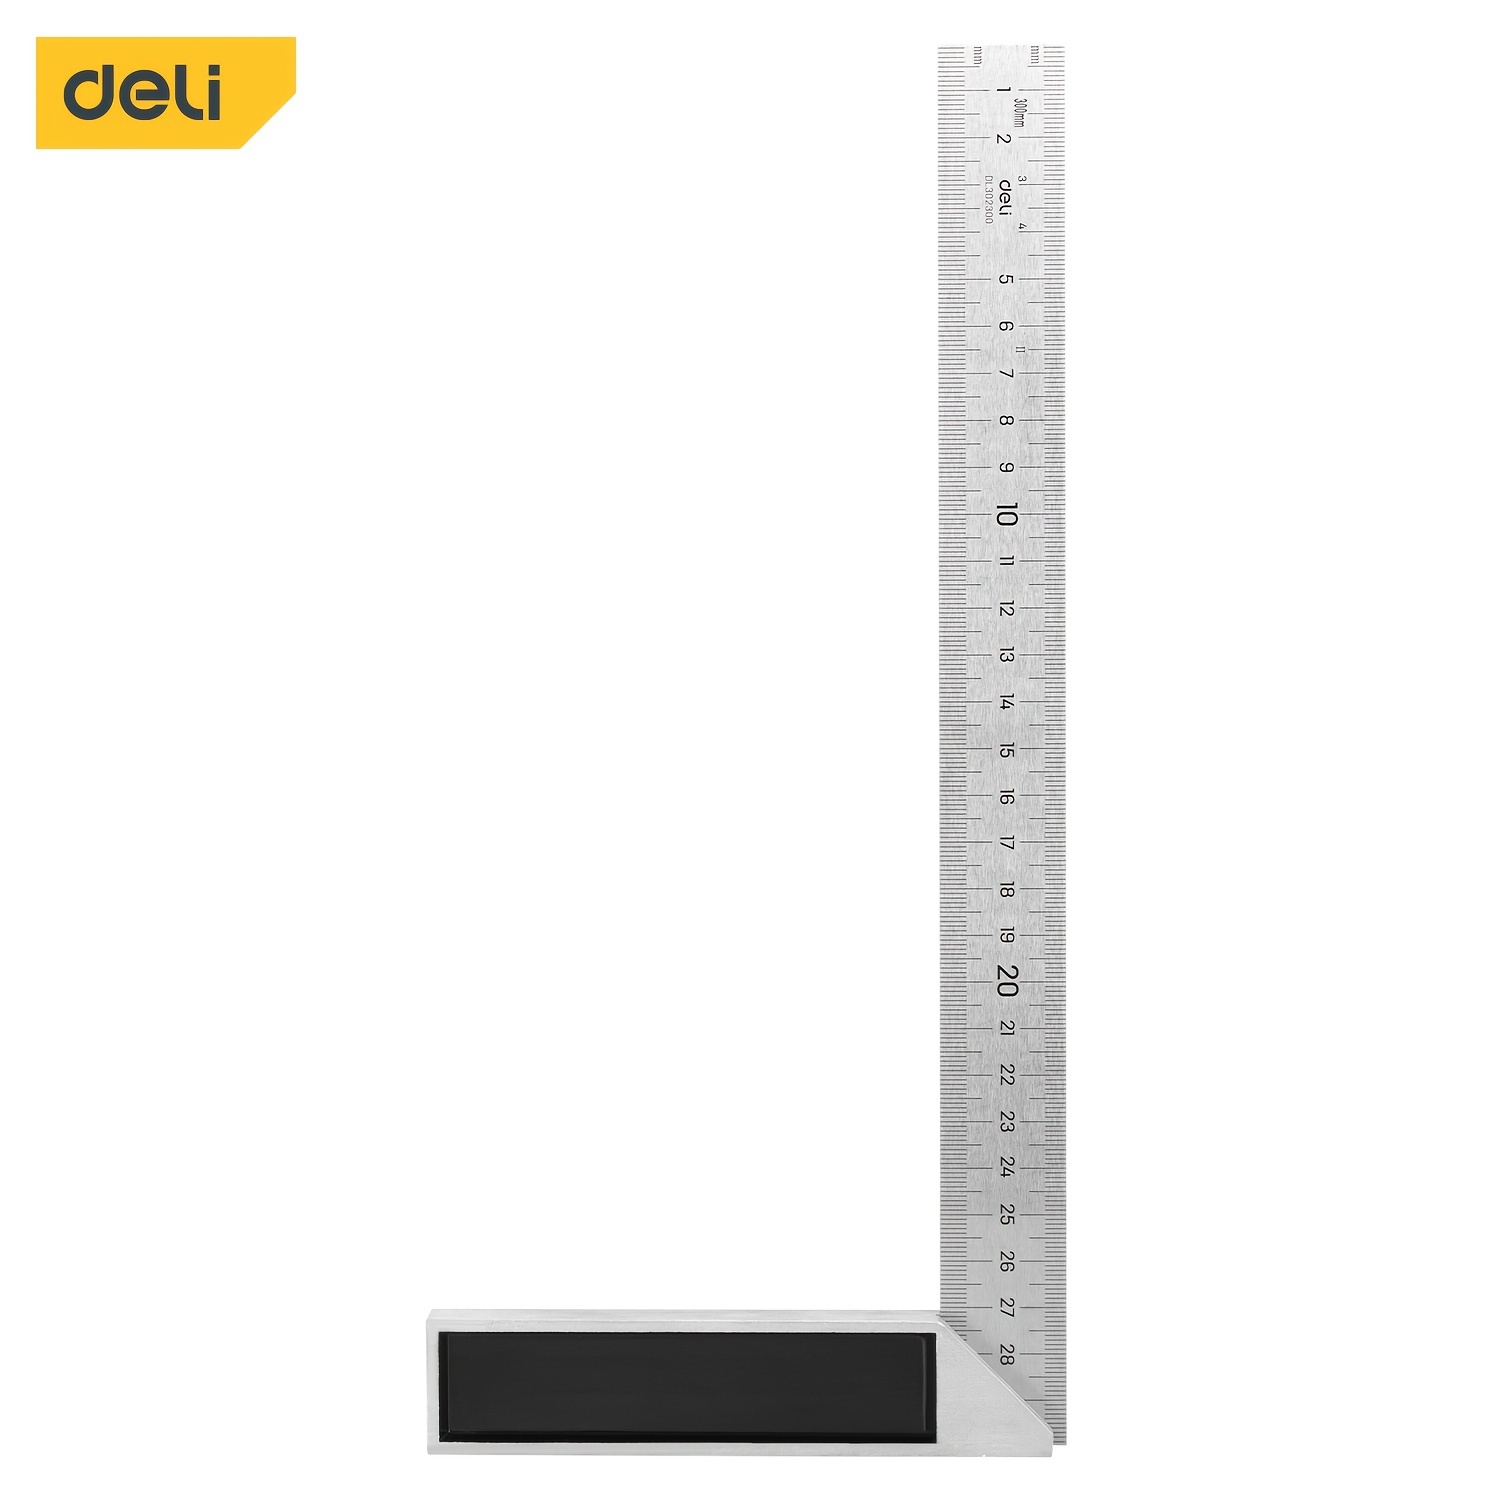 L Type Cutting Ruler Aluminum Alloy Measuring Tool Craft Safety Ruler  Measurement Drafting Tool for Length Measurement Measuring Leather(L-shaped